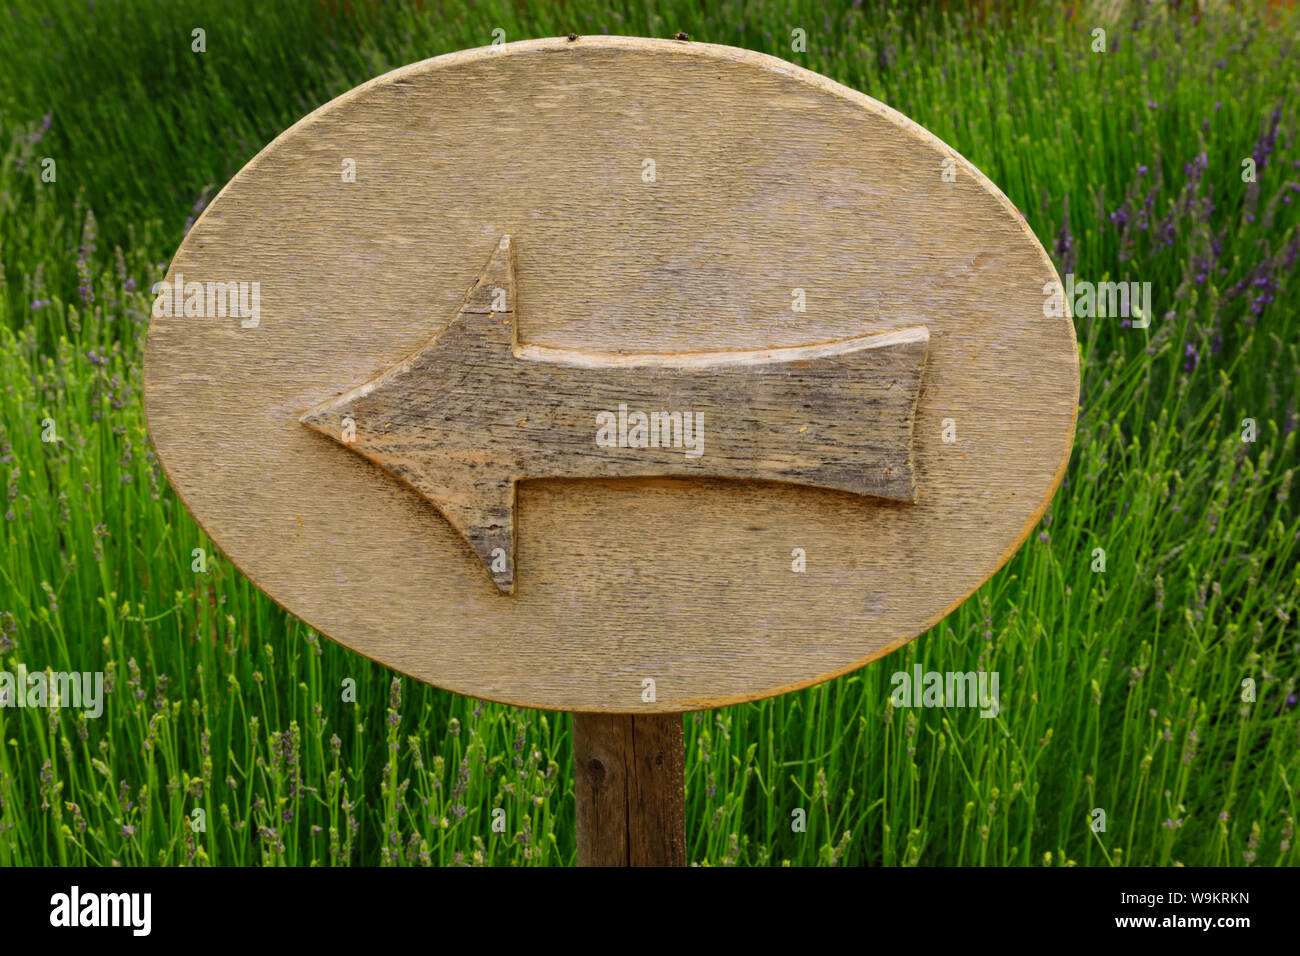 Wooden arrow sign on a post against lavender grass. Stock Photo